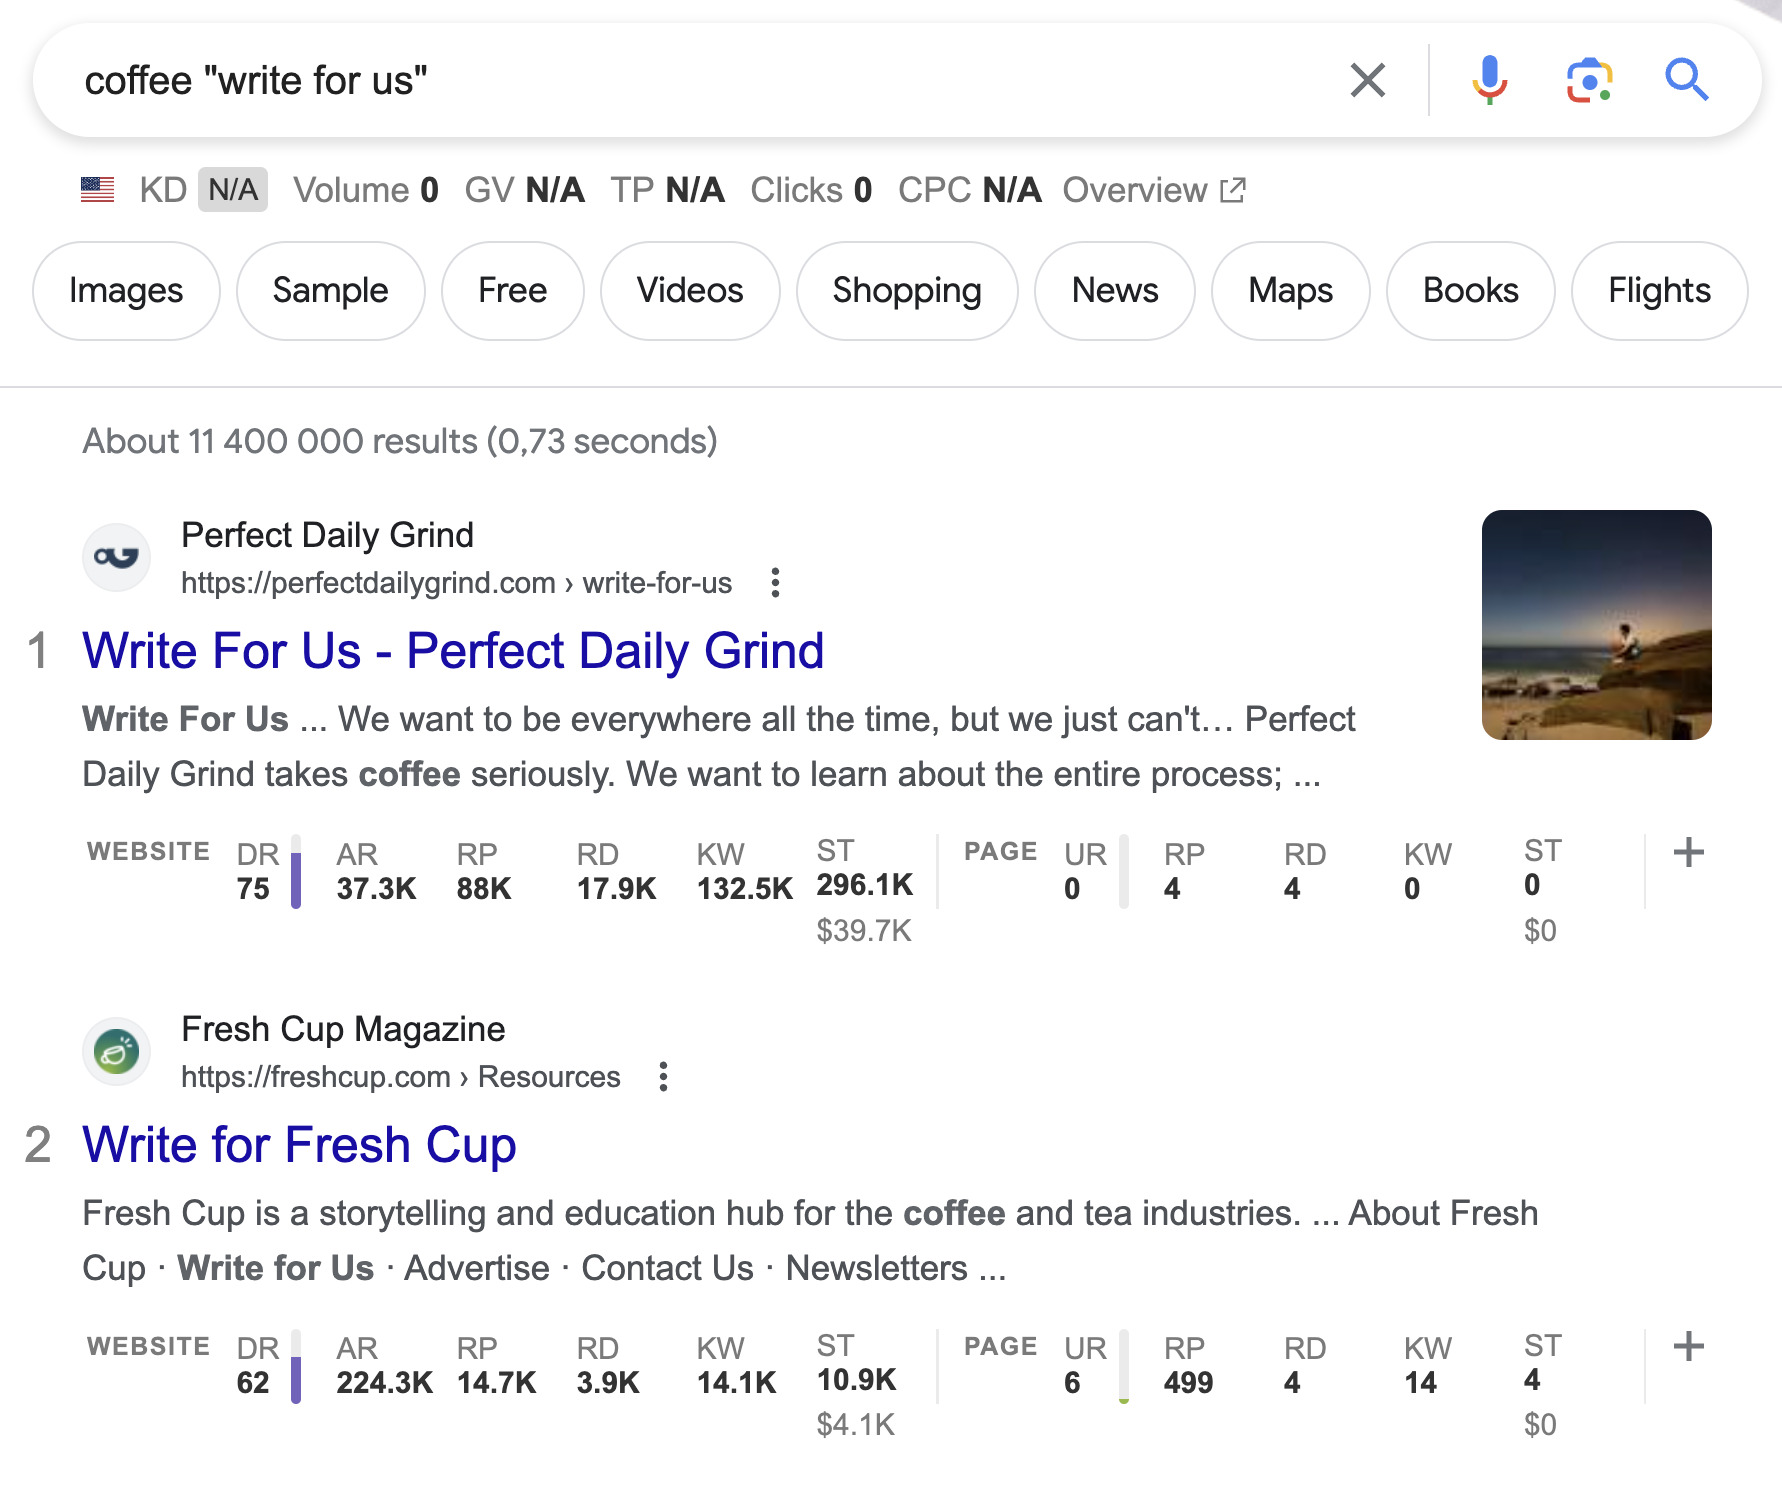 Google search results for "coffee 'write for us'"